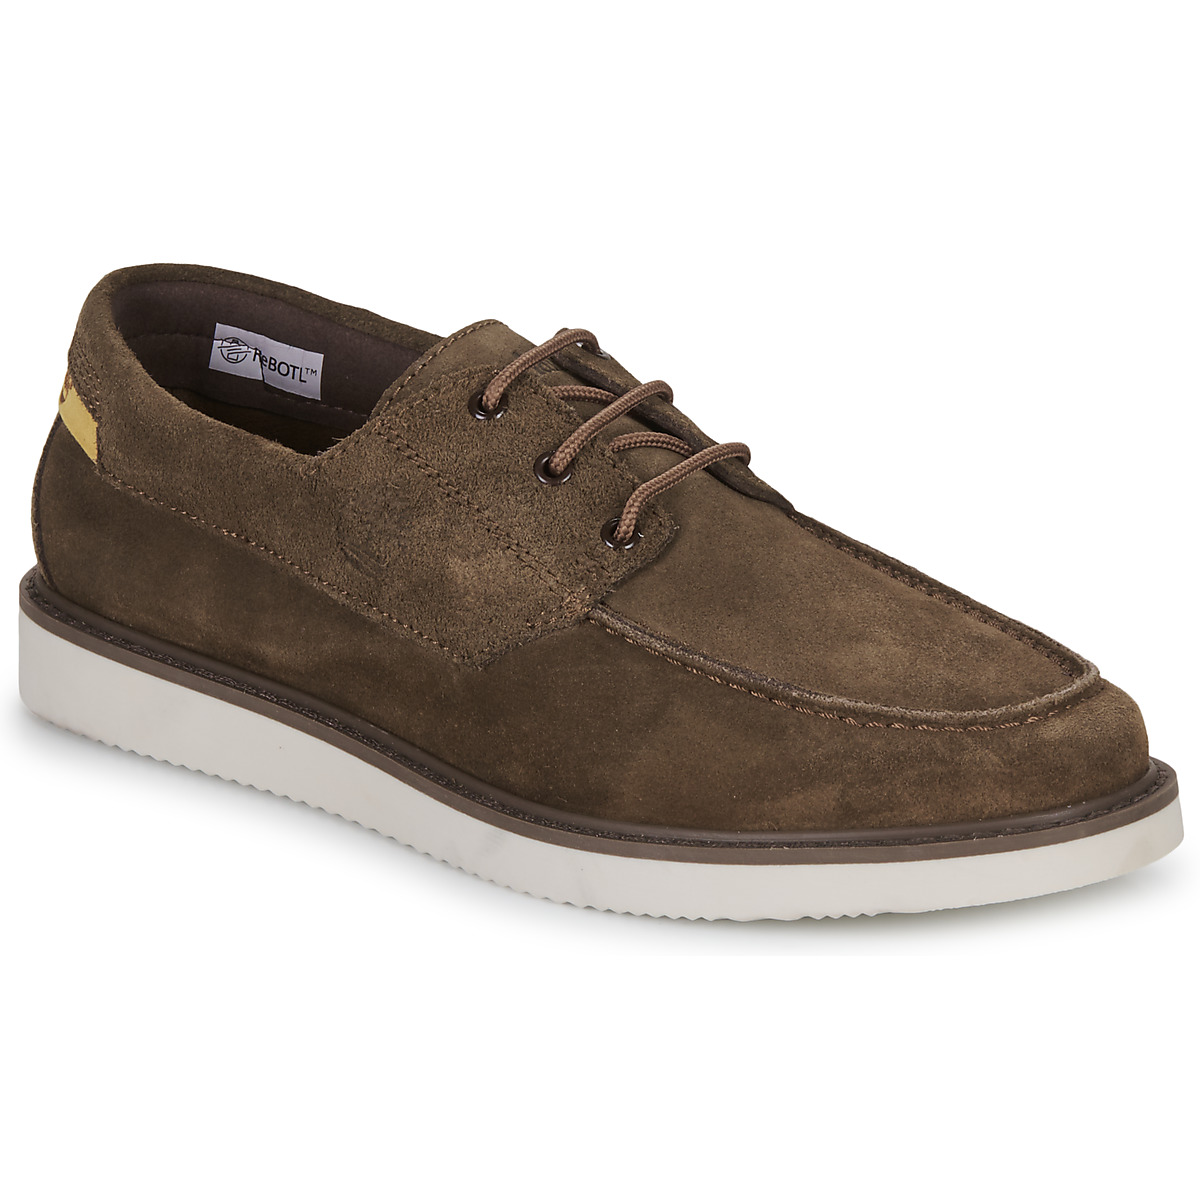 Boat shoes Timberland NEWMARKET II LTHR BOAT